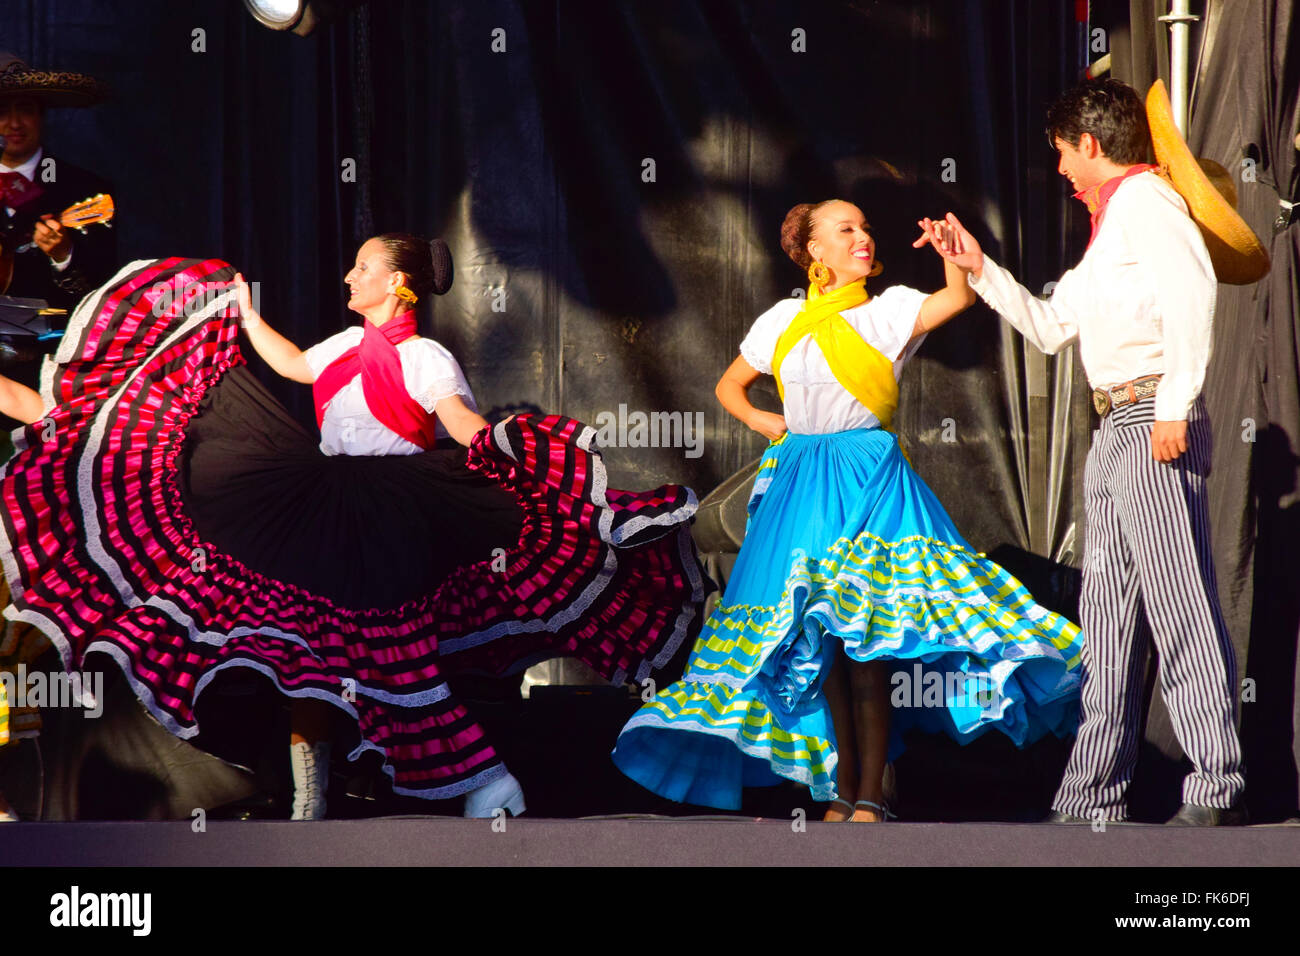 Mexican folk dance, dancers from Mexico. Stock Photo